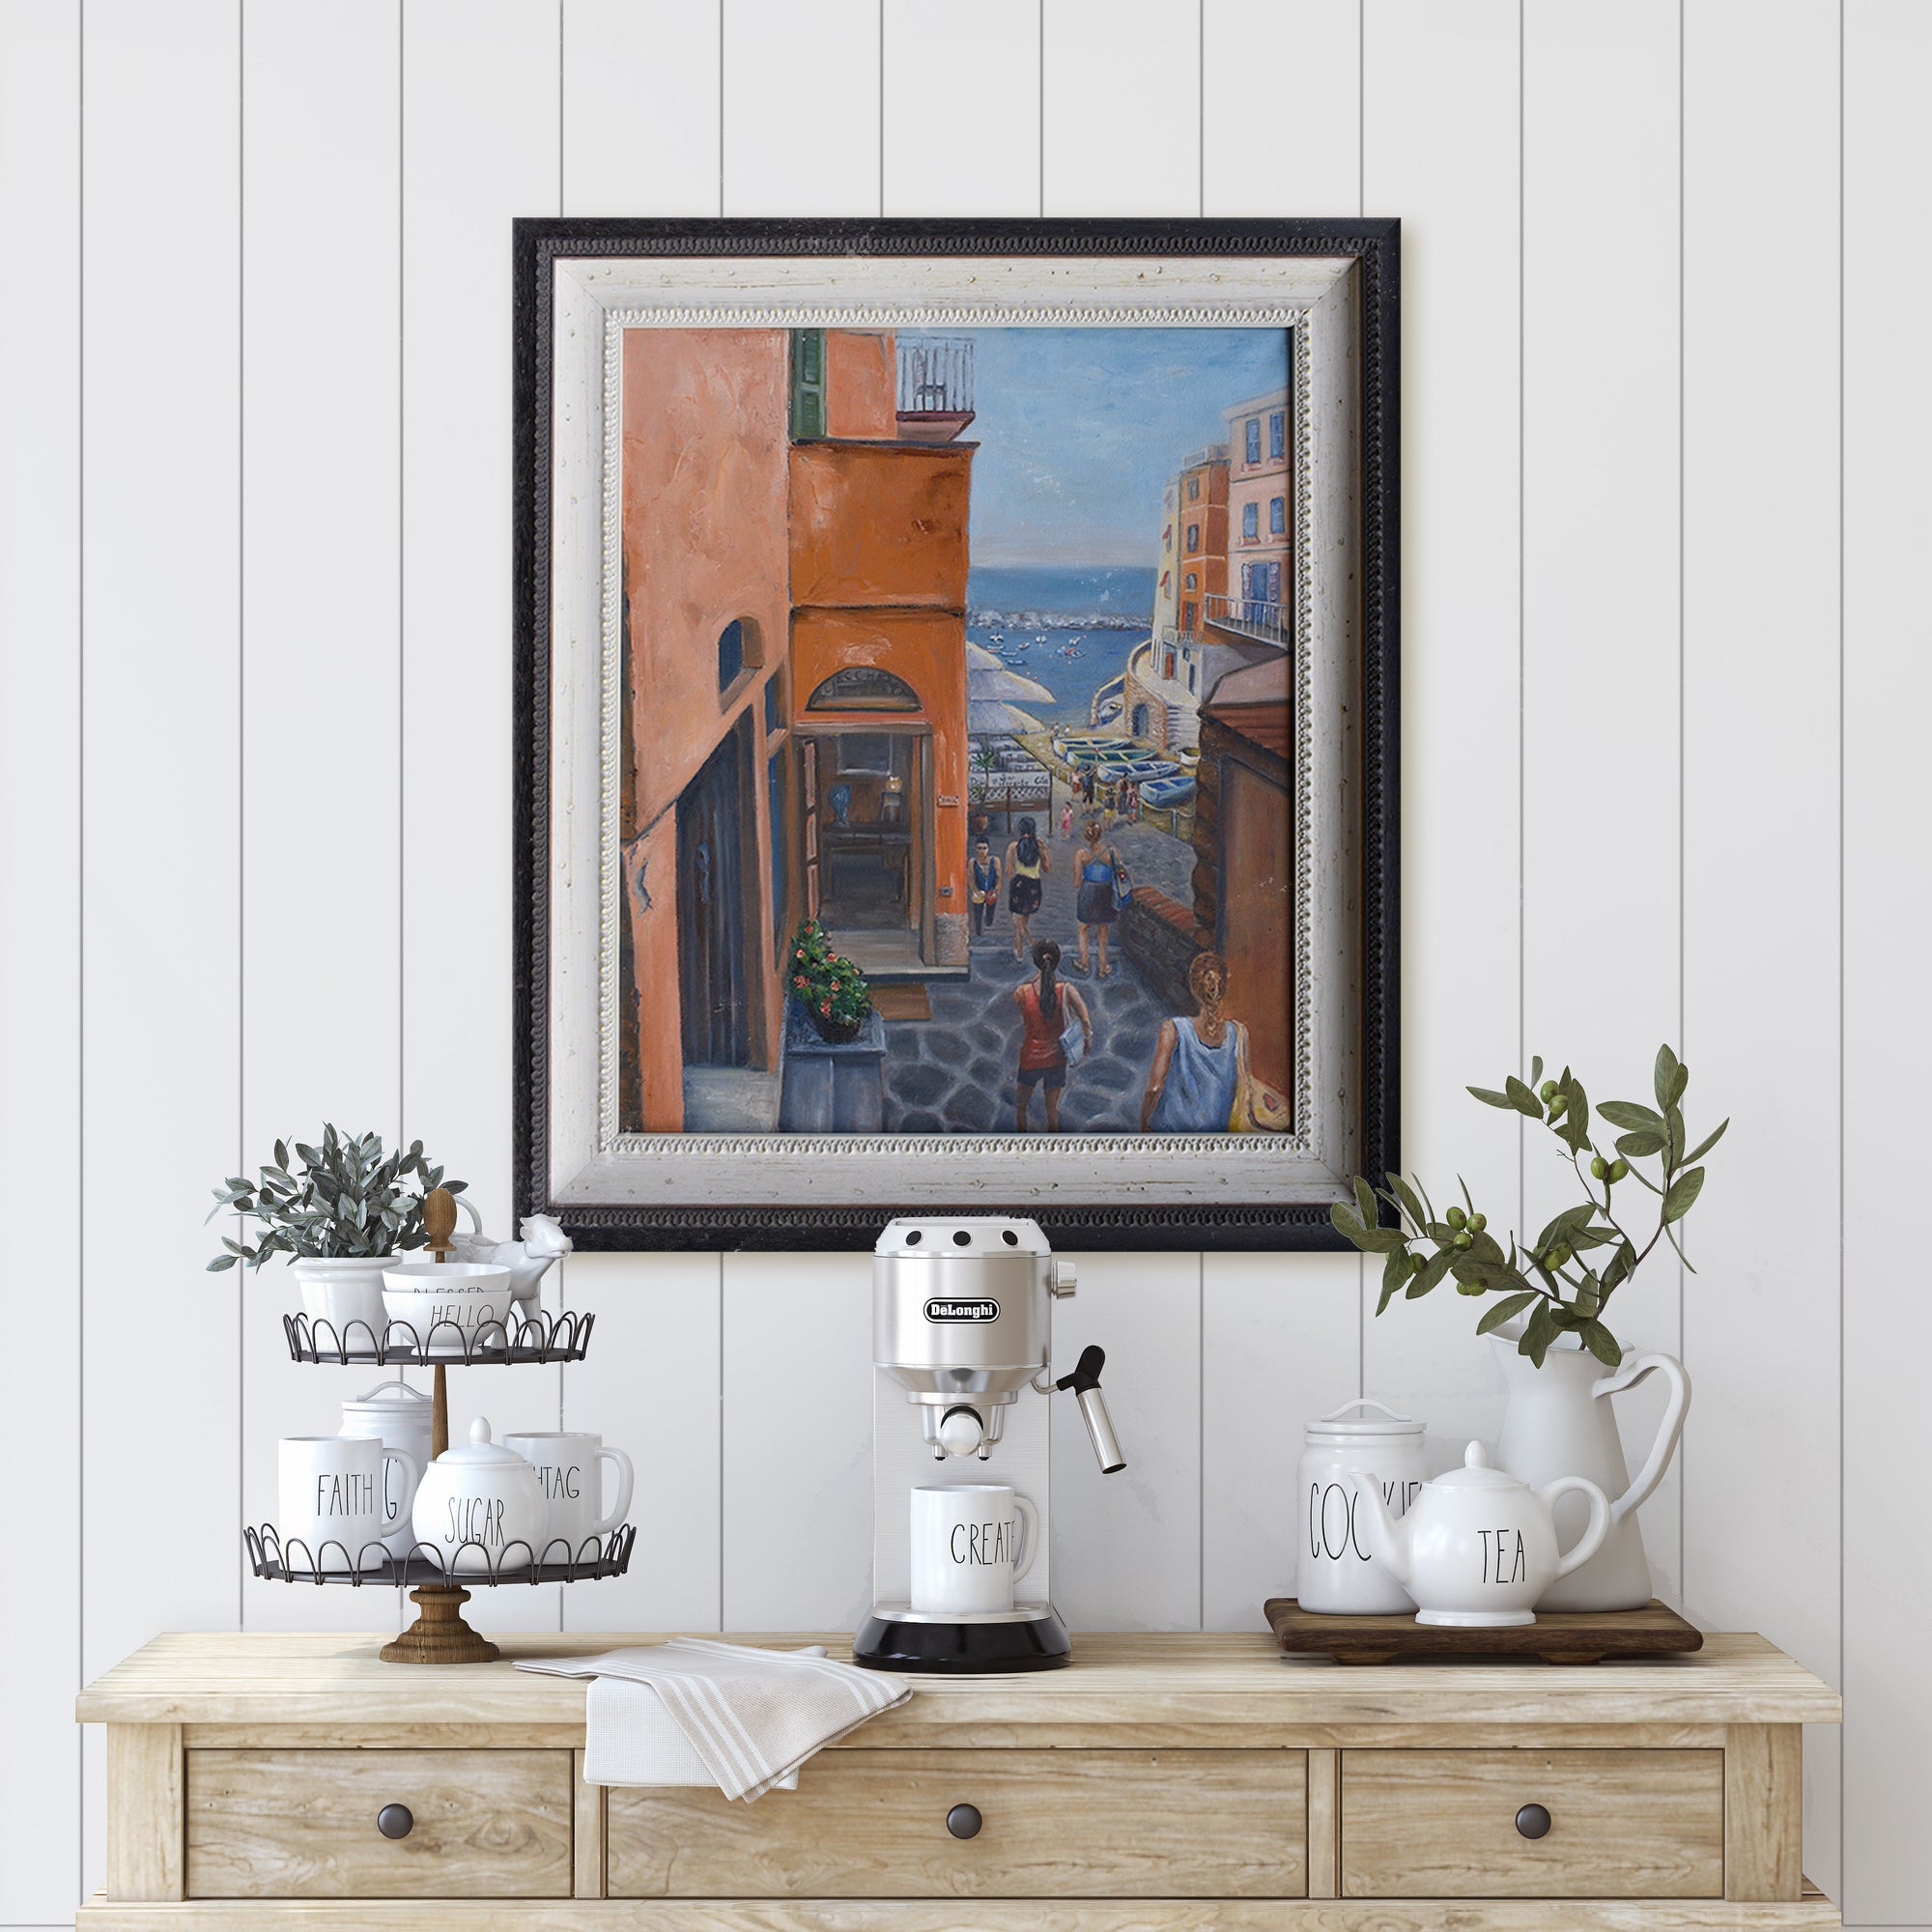 this is a painting hanging on a wall of a hot summers day in Vernazza, Cinque Terre, following the tour guide through the busy, picturesque streets. The colours, the locals and the food are highlights of this beautiful place. by Australian Artist Jenni Rogers